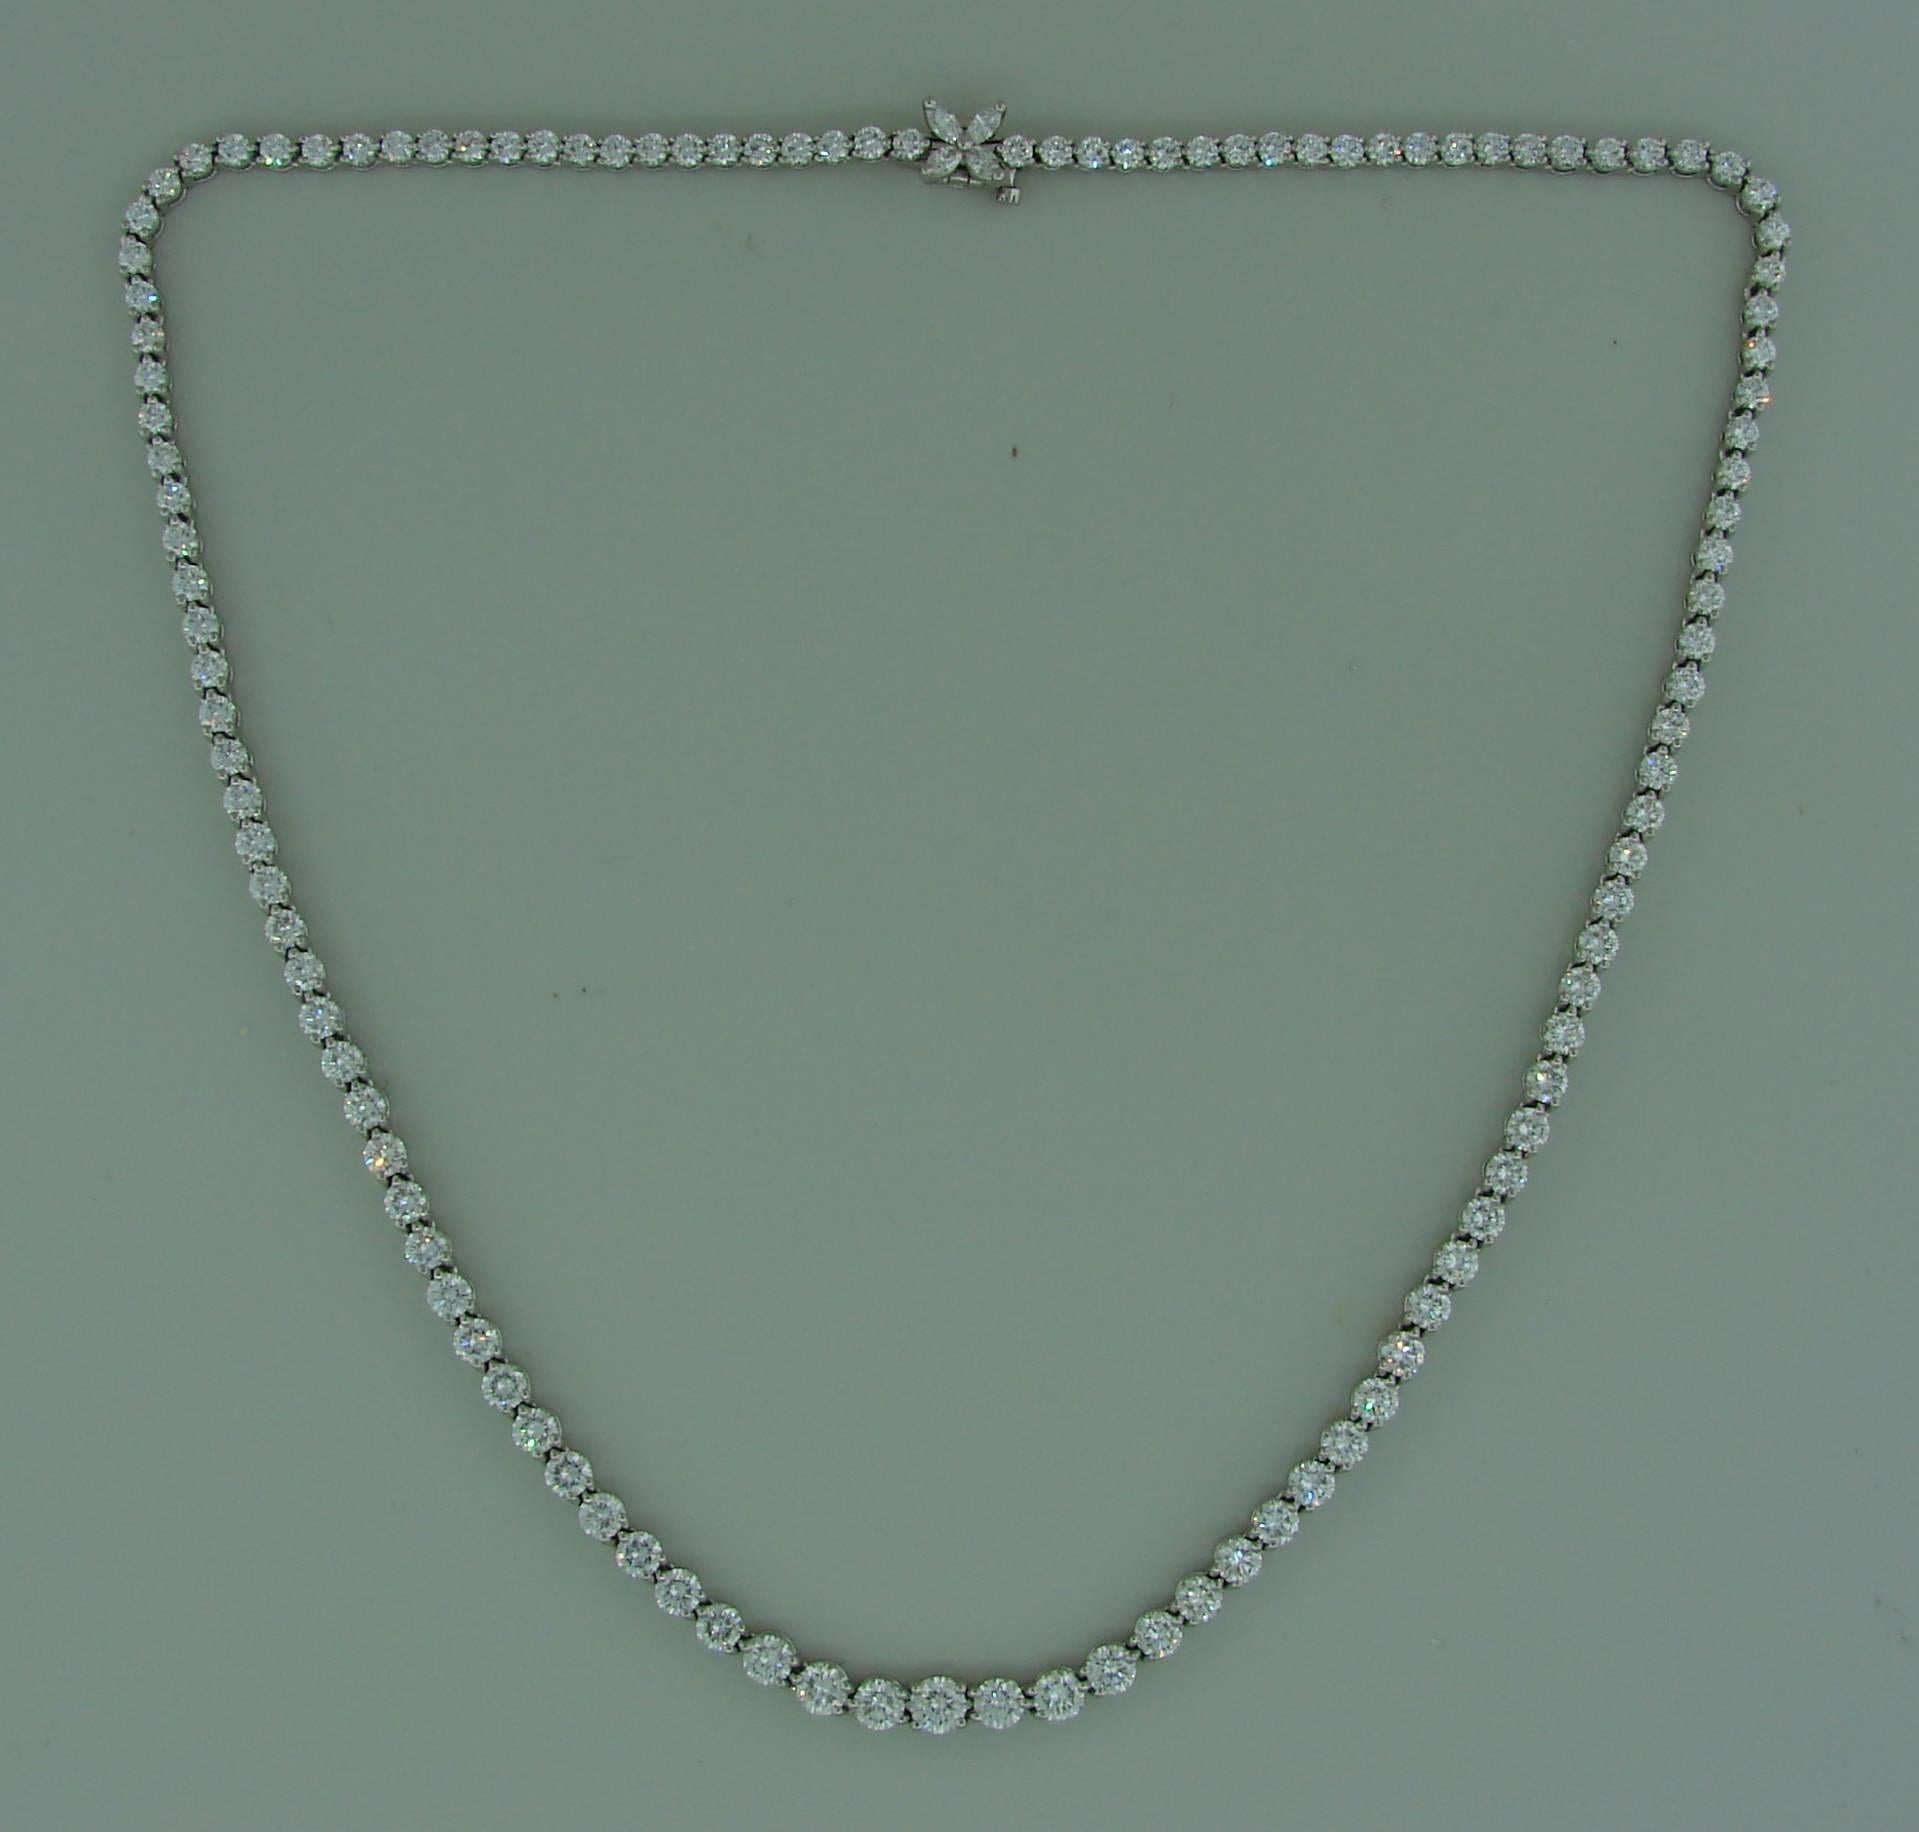 Stunning diamond necklace created by Tiffany & Co. for 